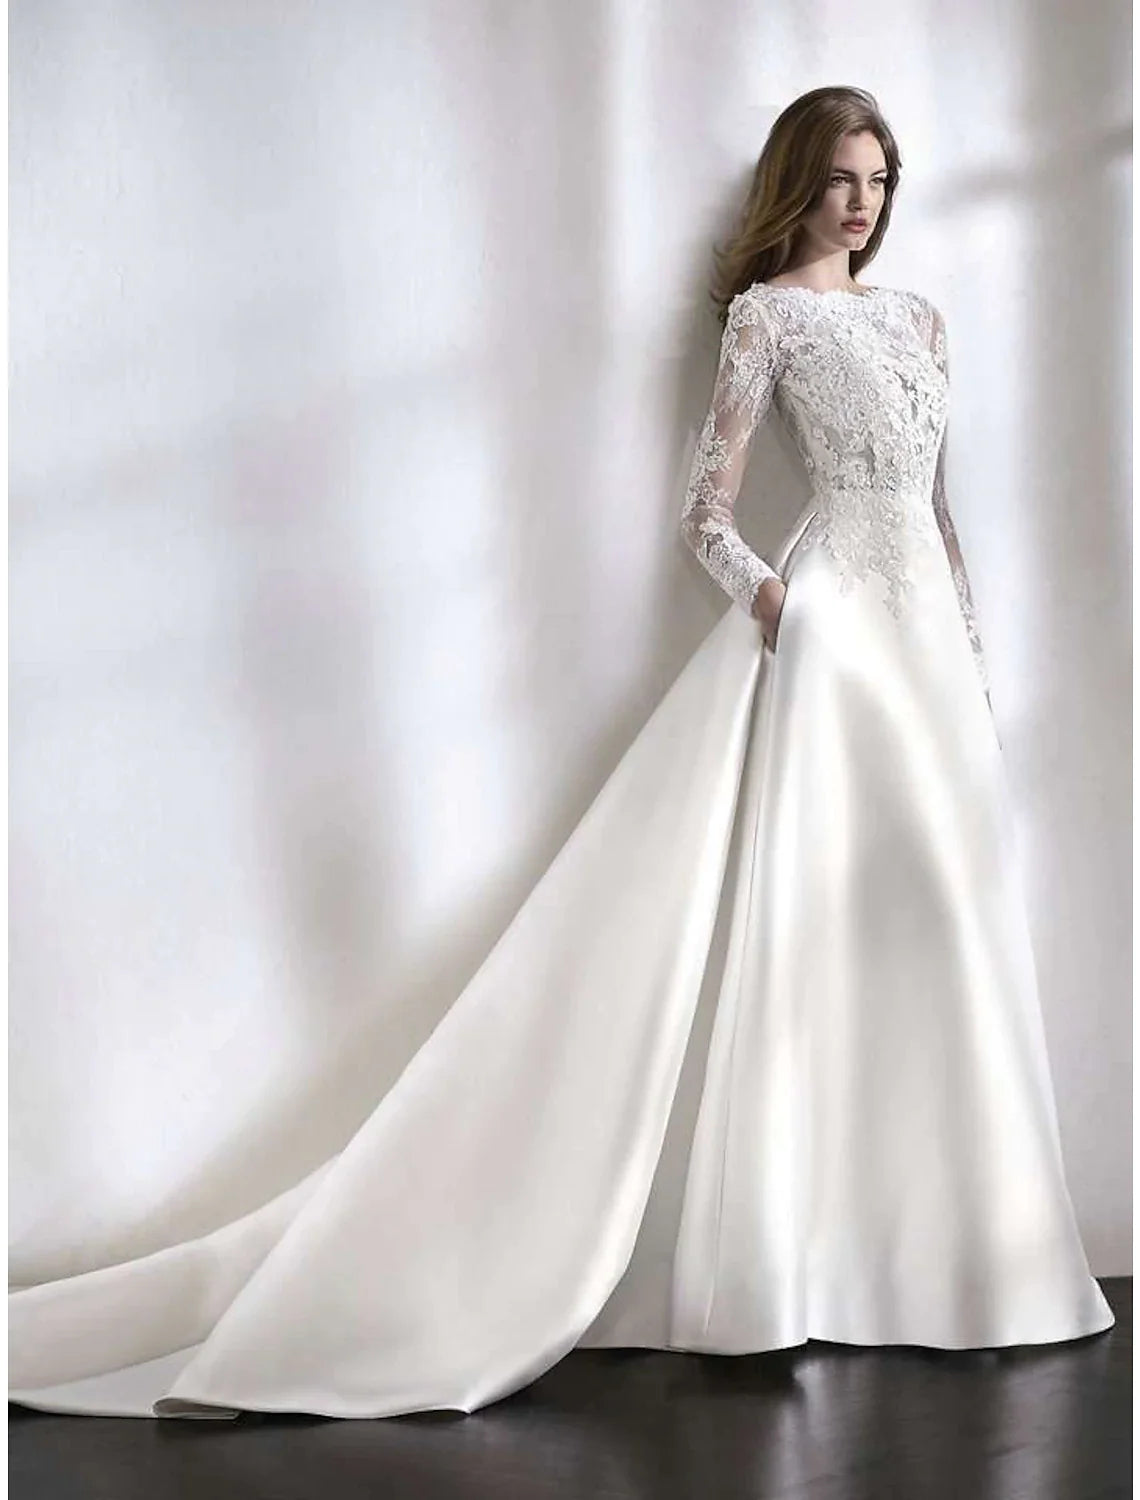 Beach Formal Wedding Dresses Chapel Train A-Line Long Sleeve Illusion Neck Satin With Lace Pleats